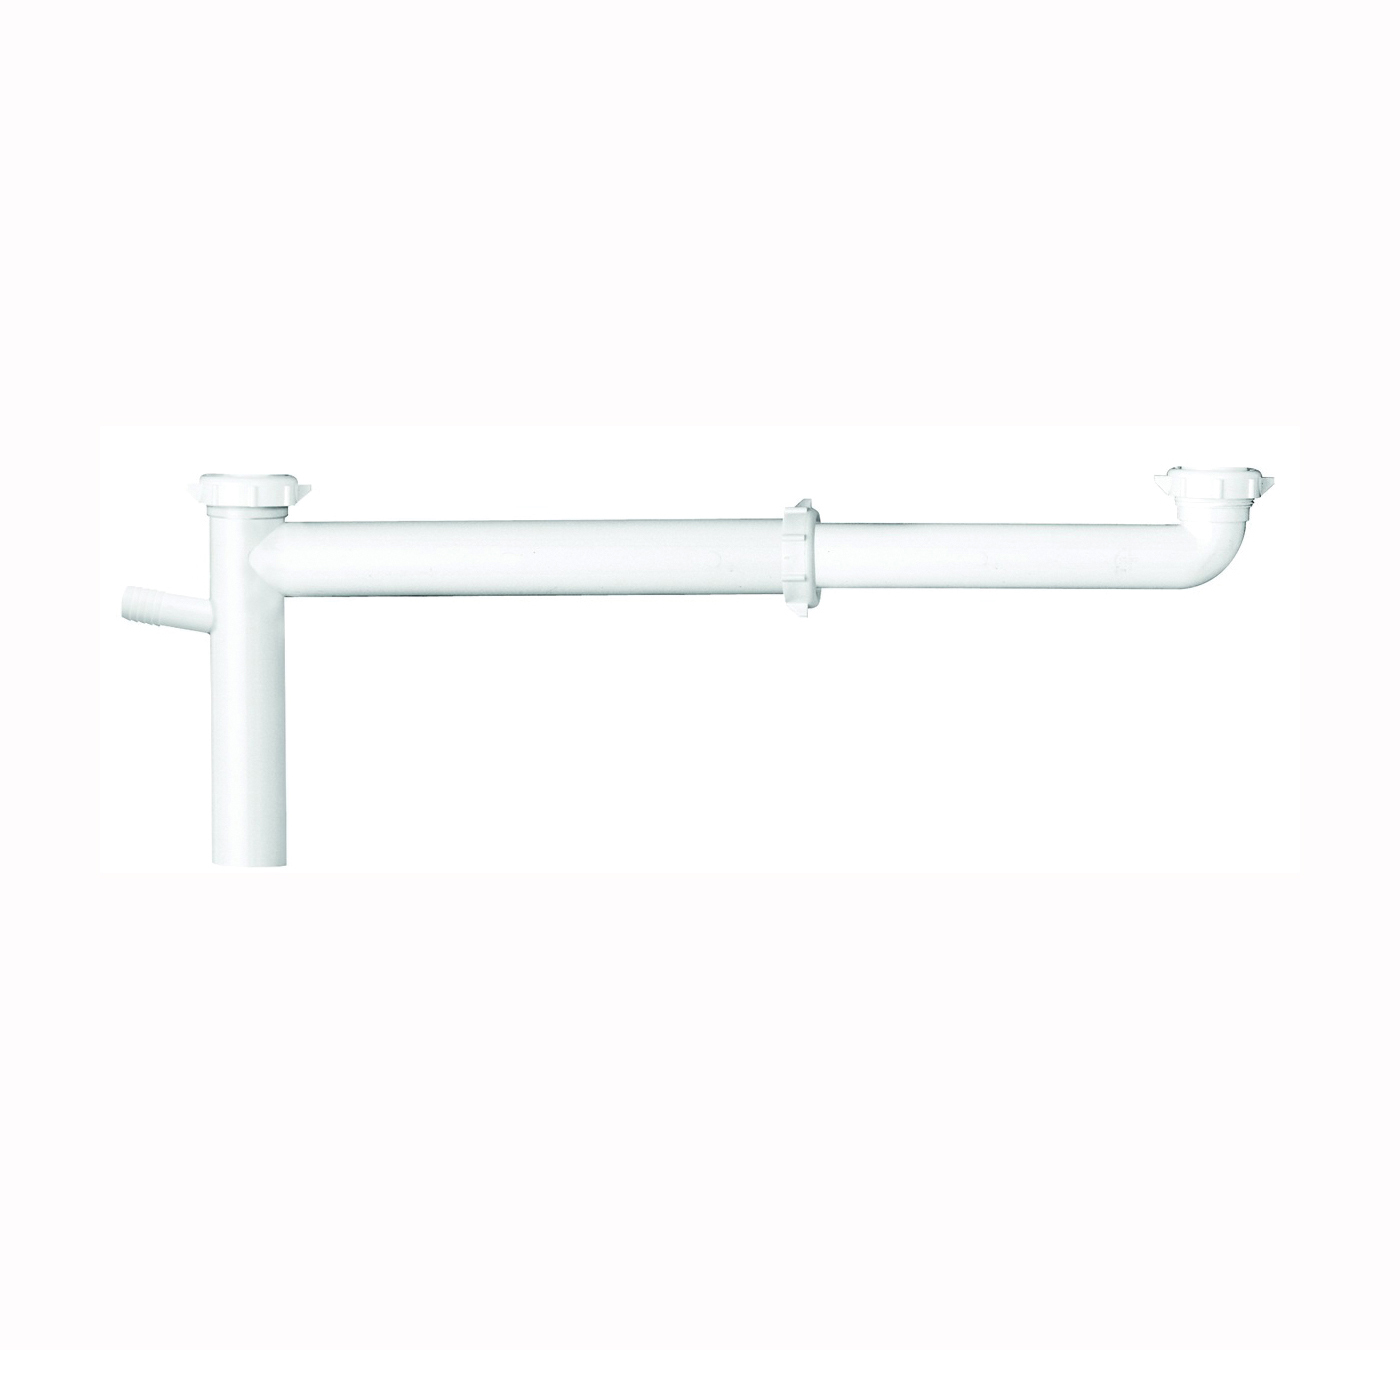 PP919W End Waste Outlet, 1-1/2 in, Slip, Plastic, White